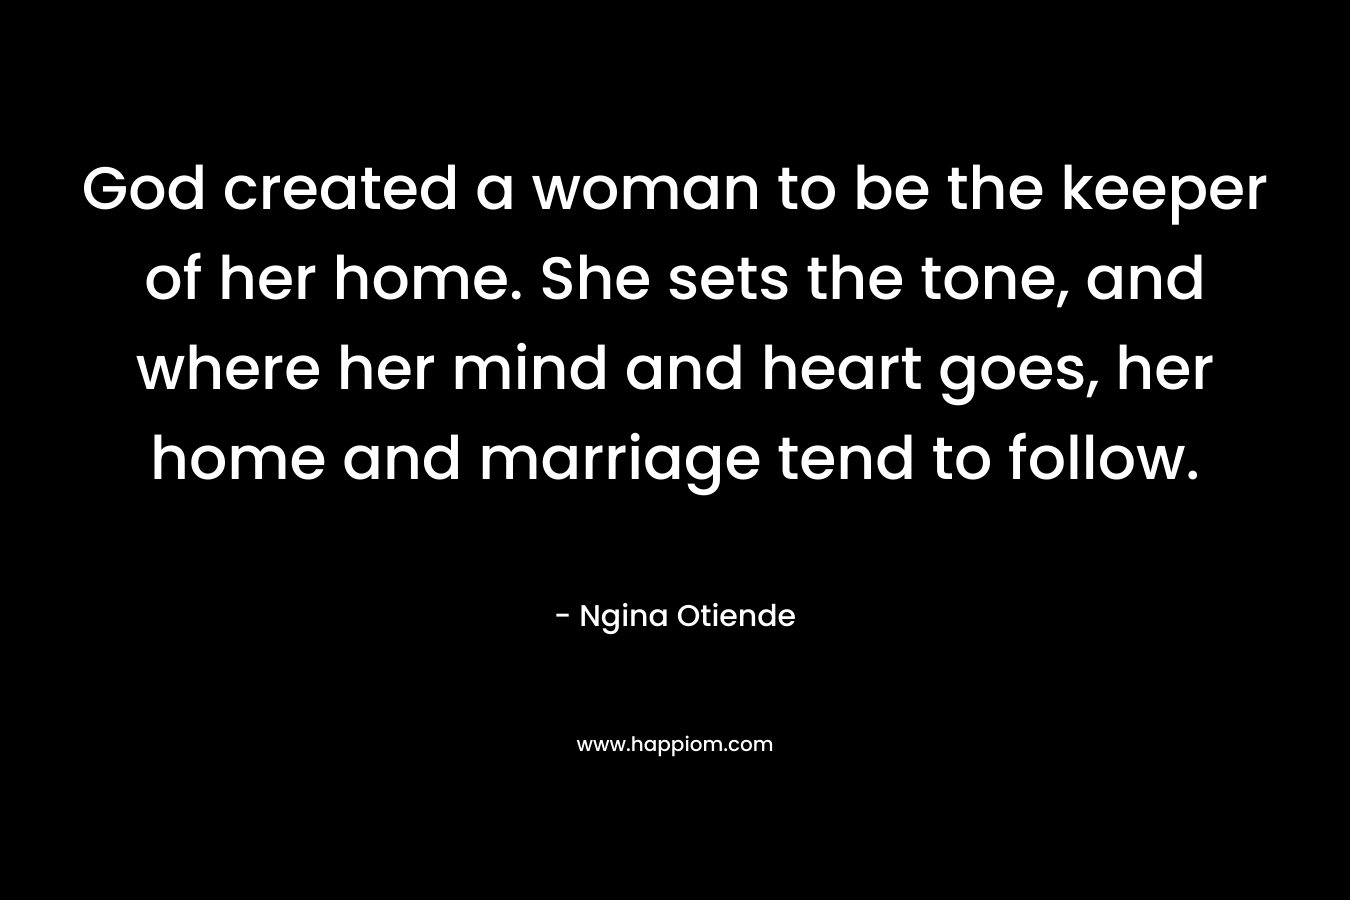 God created a woman to be the keeper of her home. She sets the tone, and where her mind and heart goes, her home and marriage tend to follow.